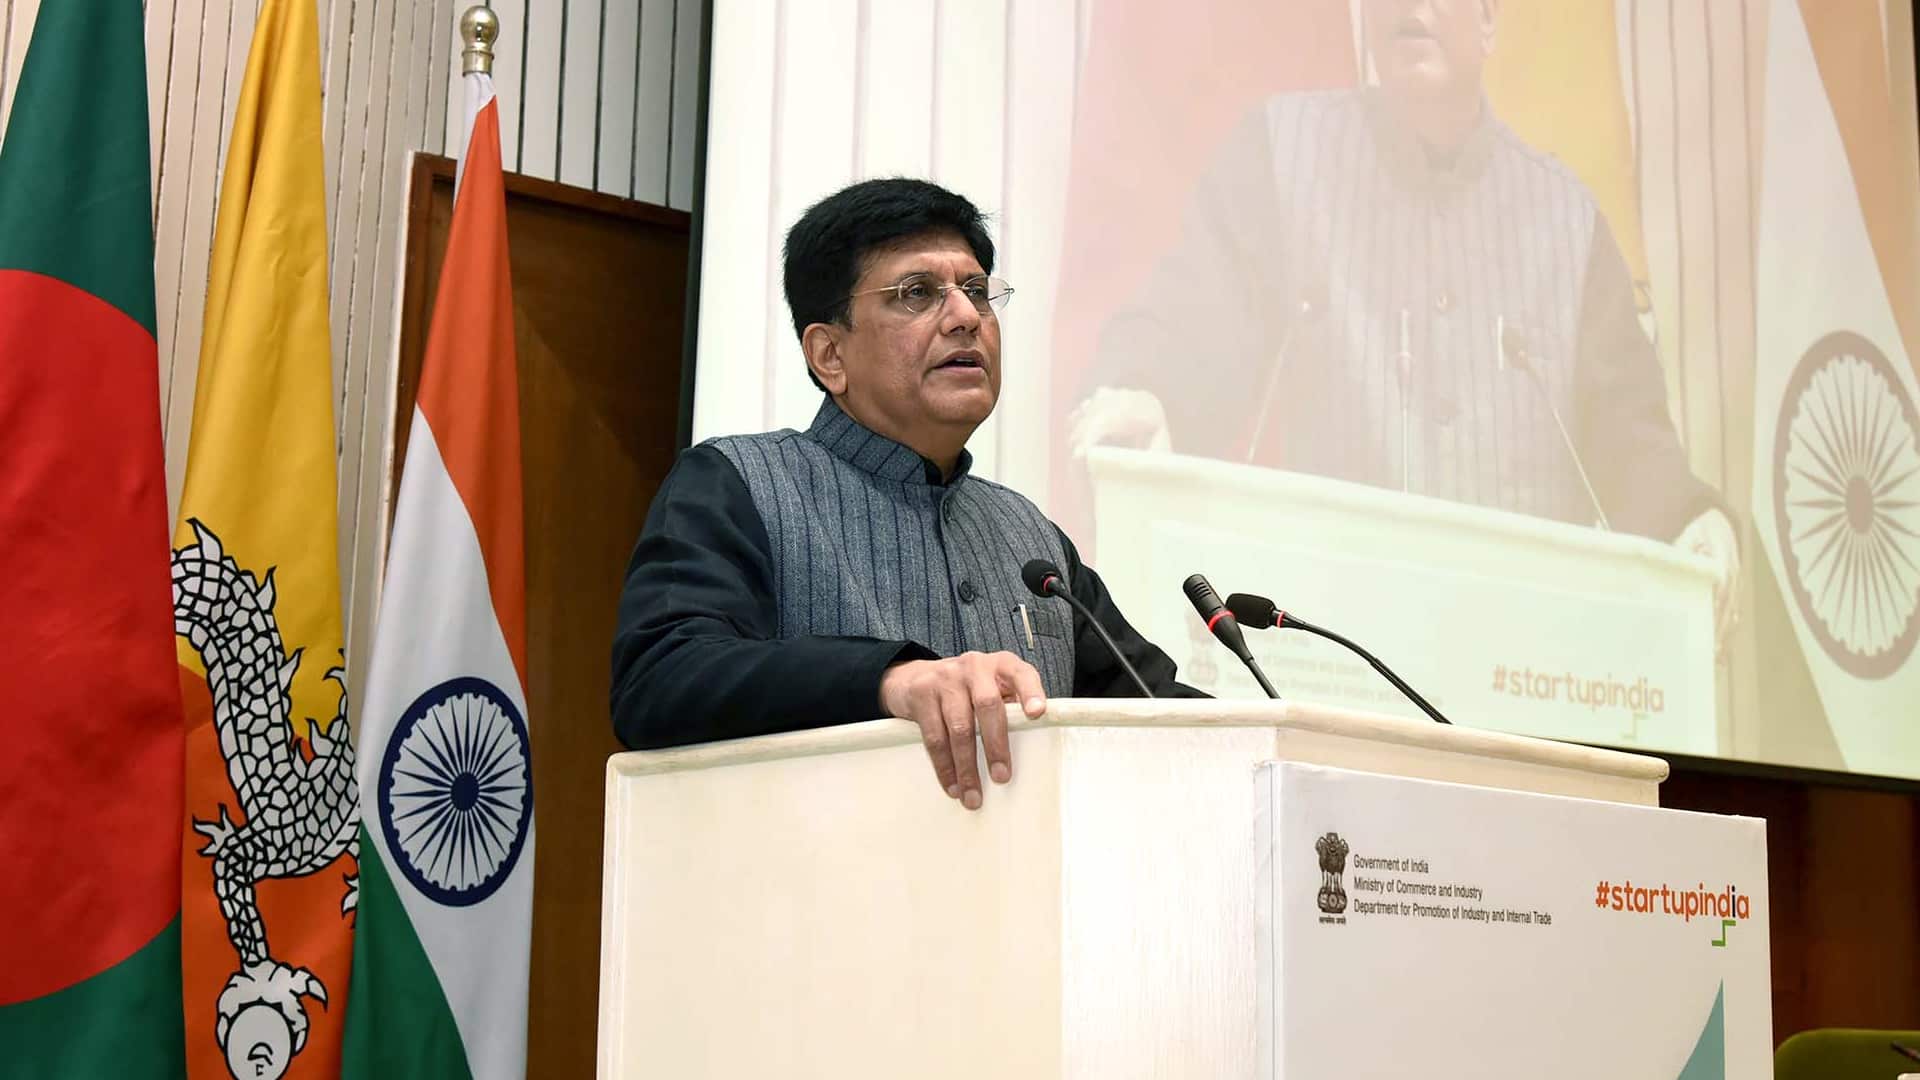 Startup India seed fund scheme to support domestic entrepreneurs, their business ideas: Goyal